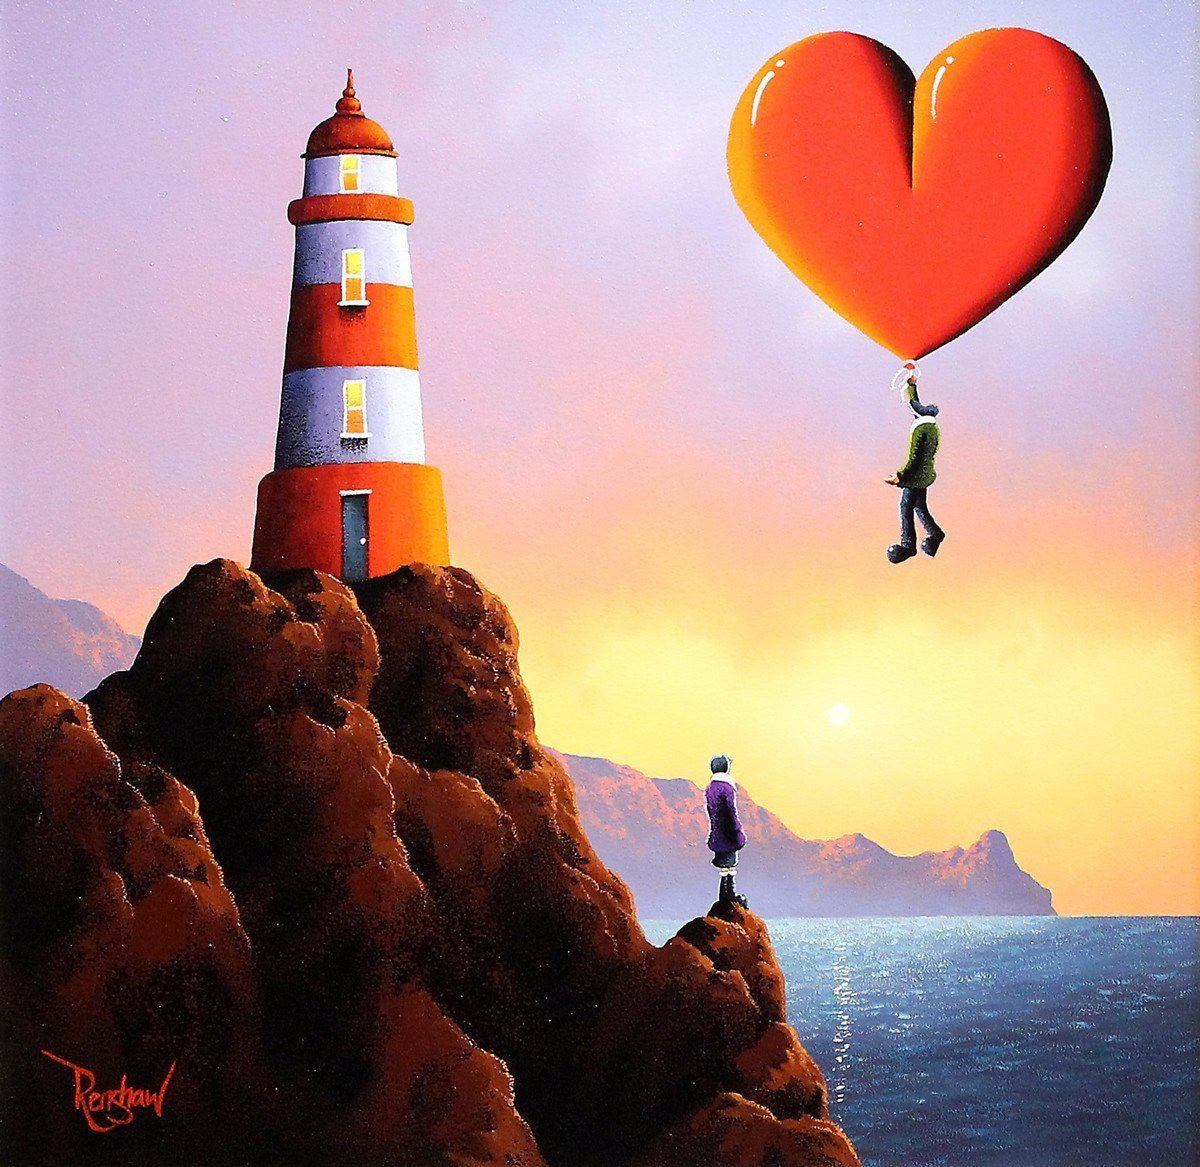 The Lighthouse - SOLD David Renshaw